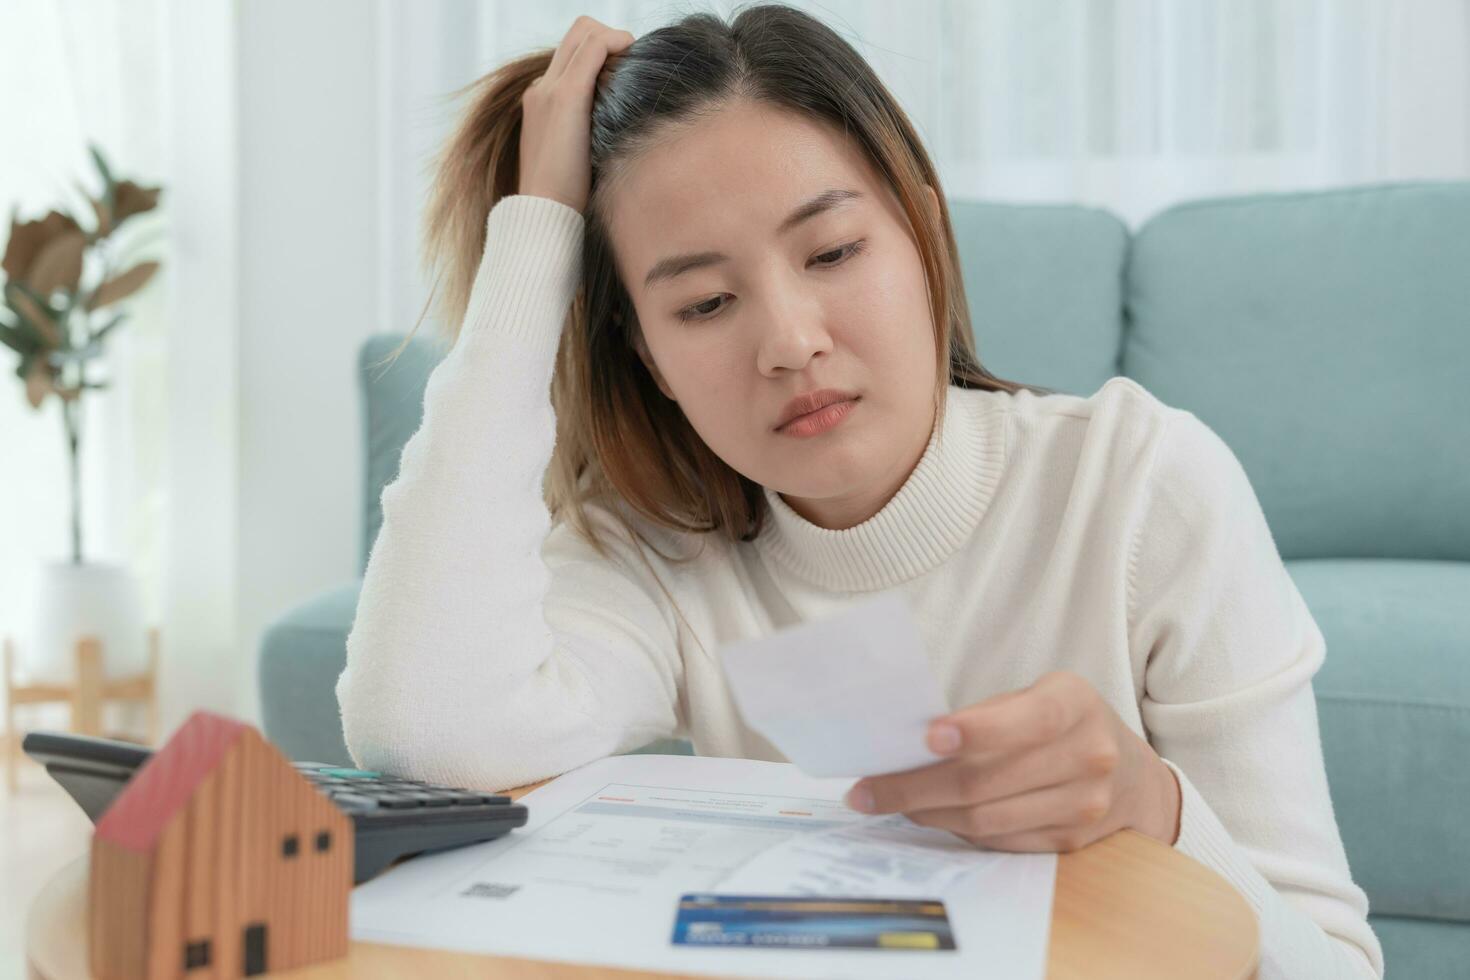 Debt house, Stressed and headache asian woman with large bills or invoices no money to pay, shortage, Financial problems, mortgage, loan, bankruptcy, bankrupt, poor, empty wallet, overdue photo